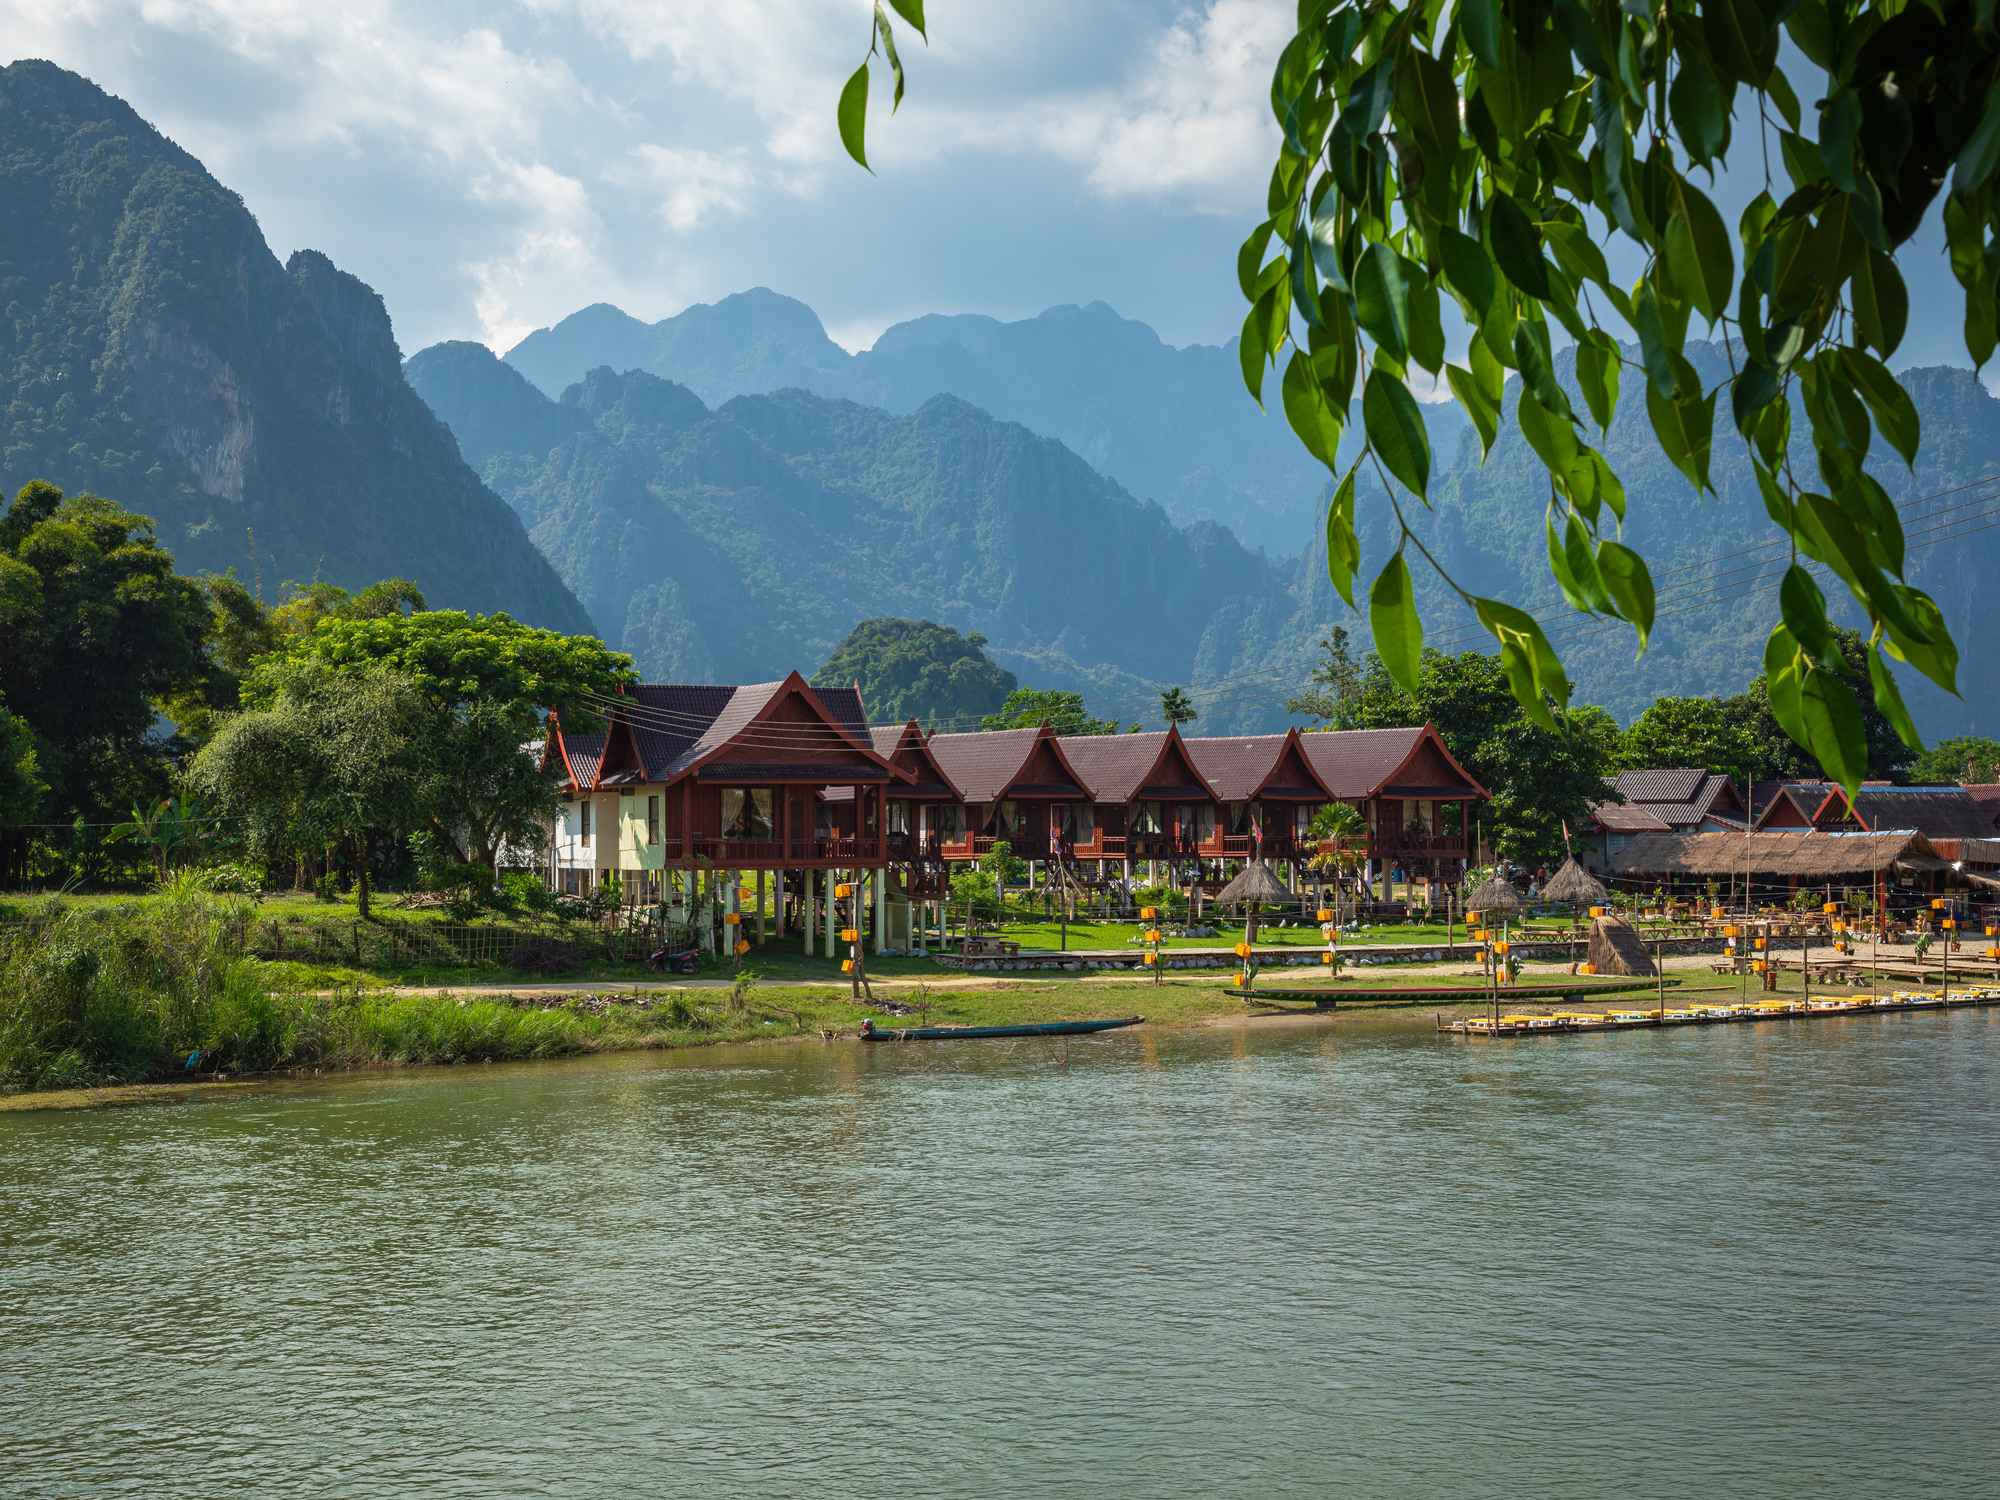 HOW TO GET FROM CHIANG MAI TO LAOS BY BOAT, BUS & PLANE